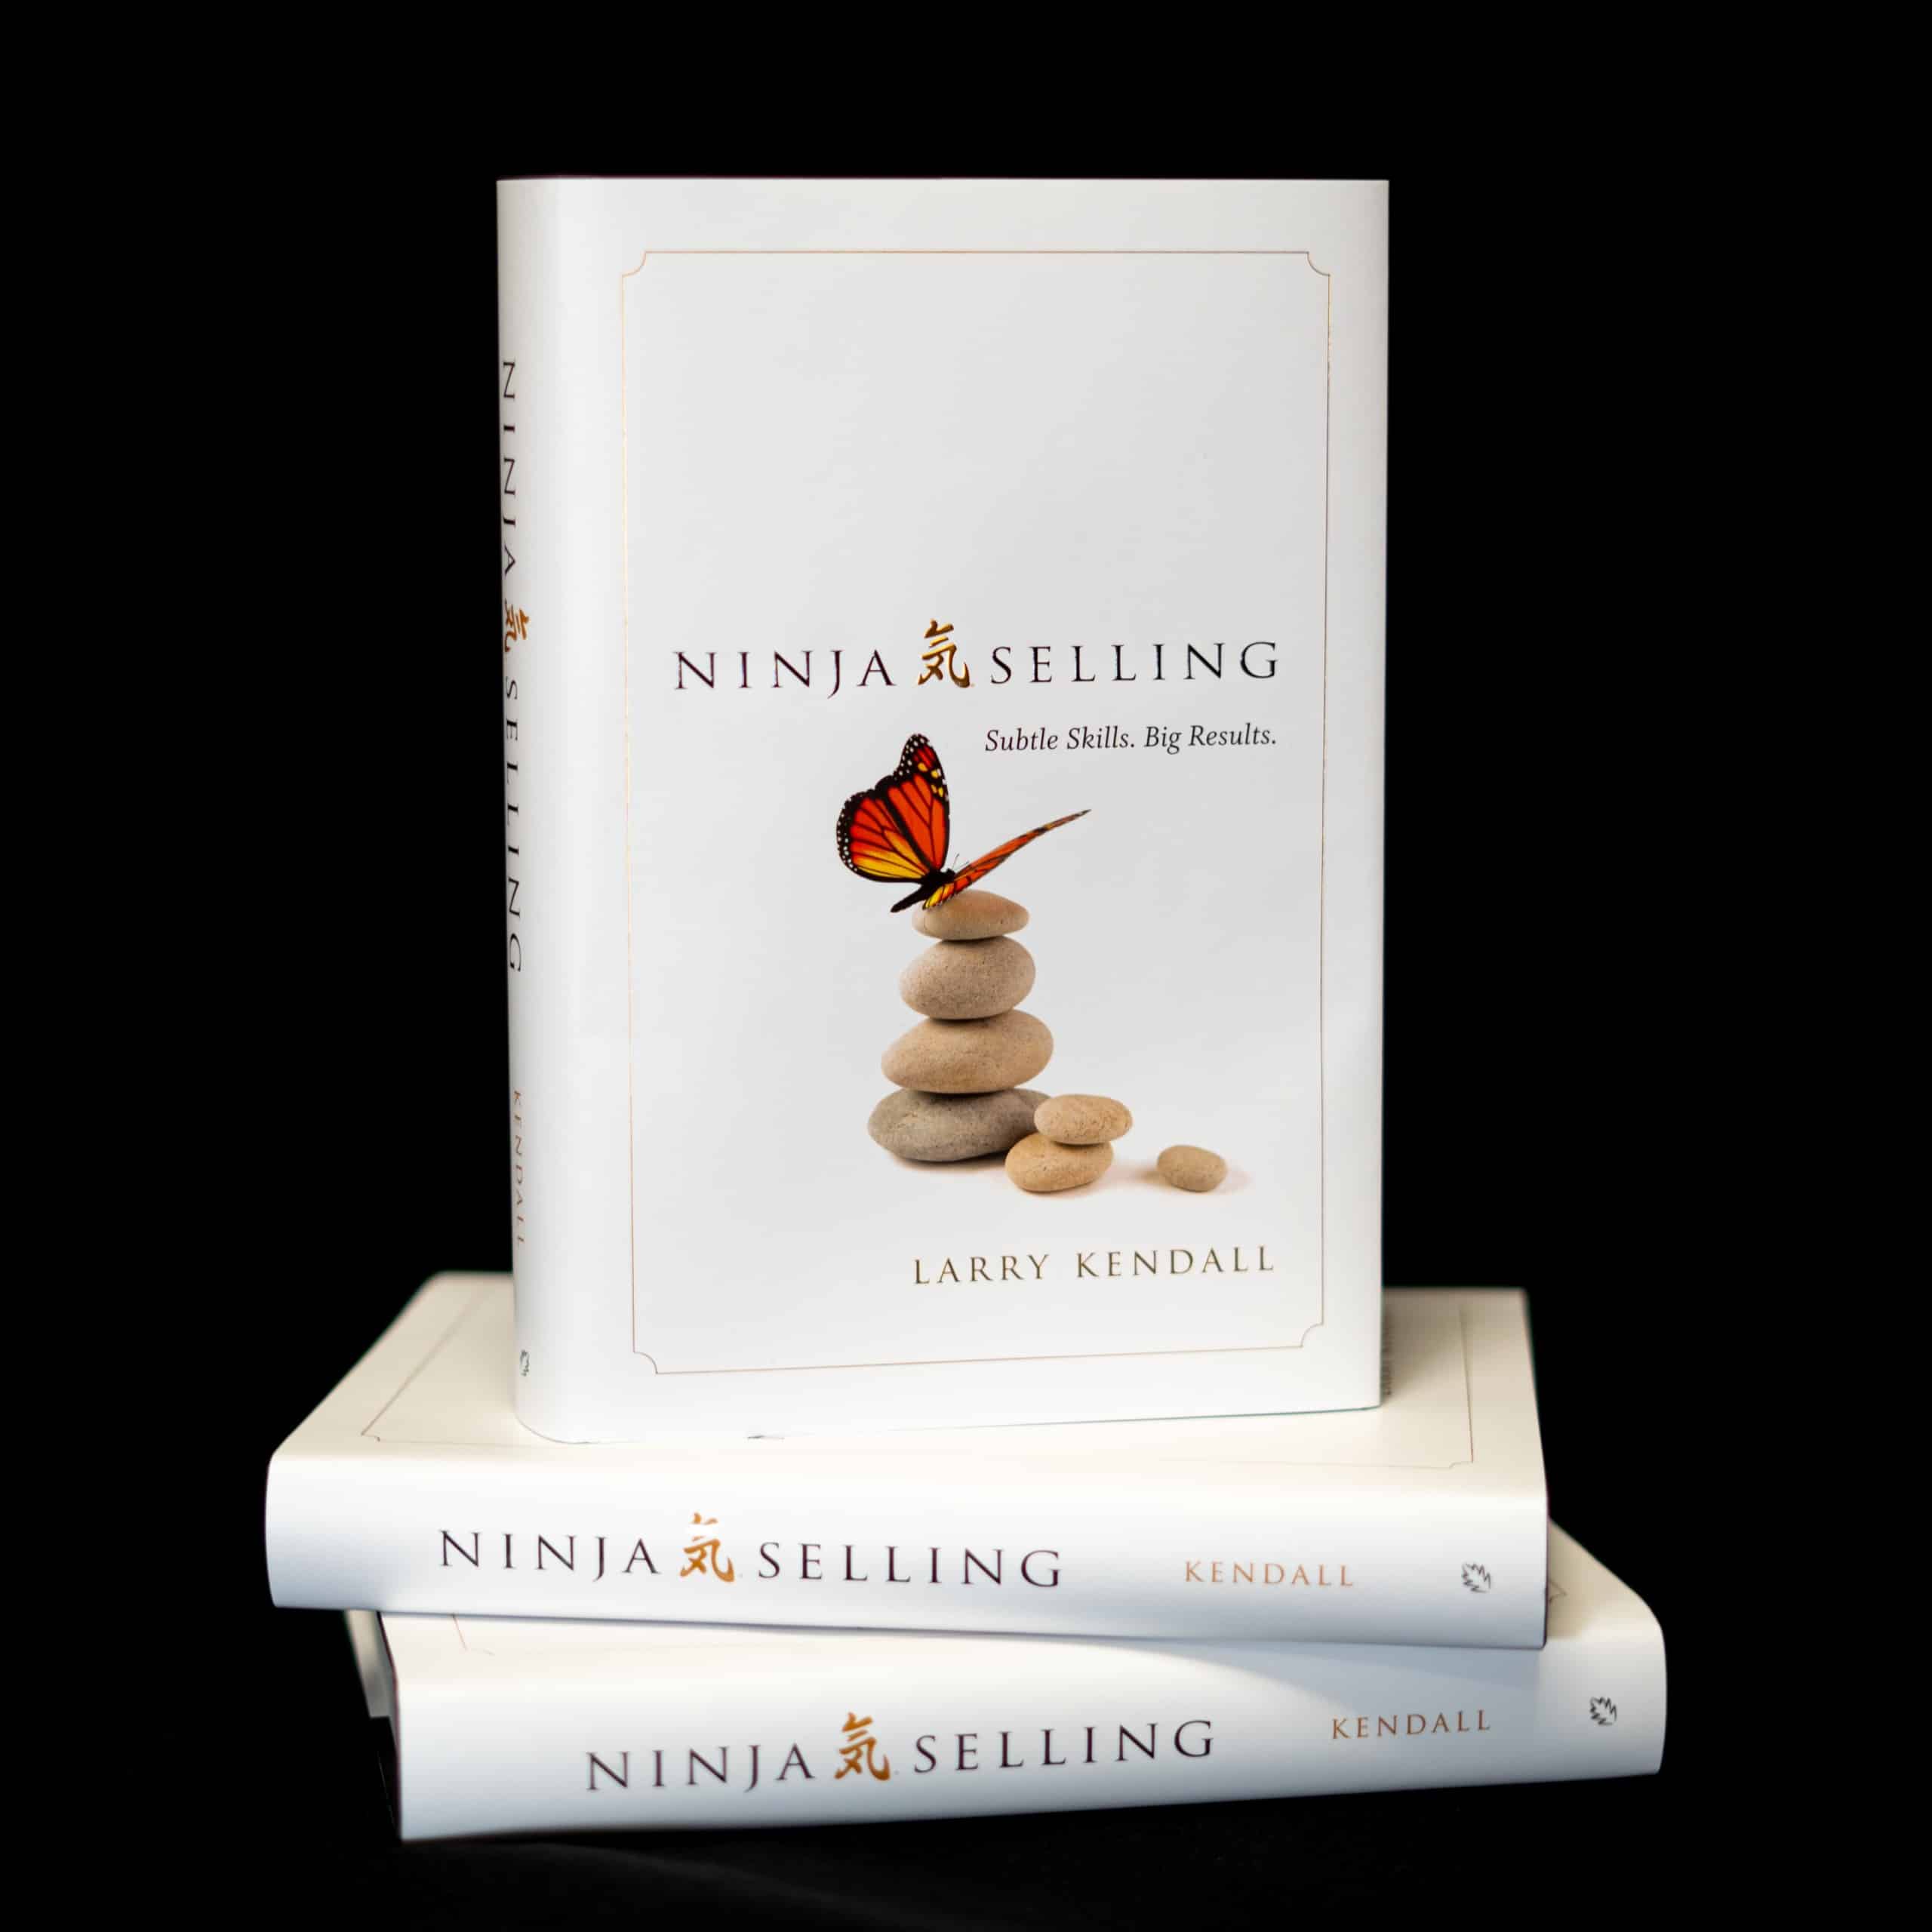 Ninja Selling: Subtle Skills. Big Results. written by Larry Kendall book cover